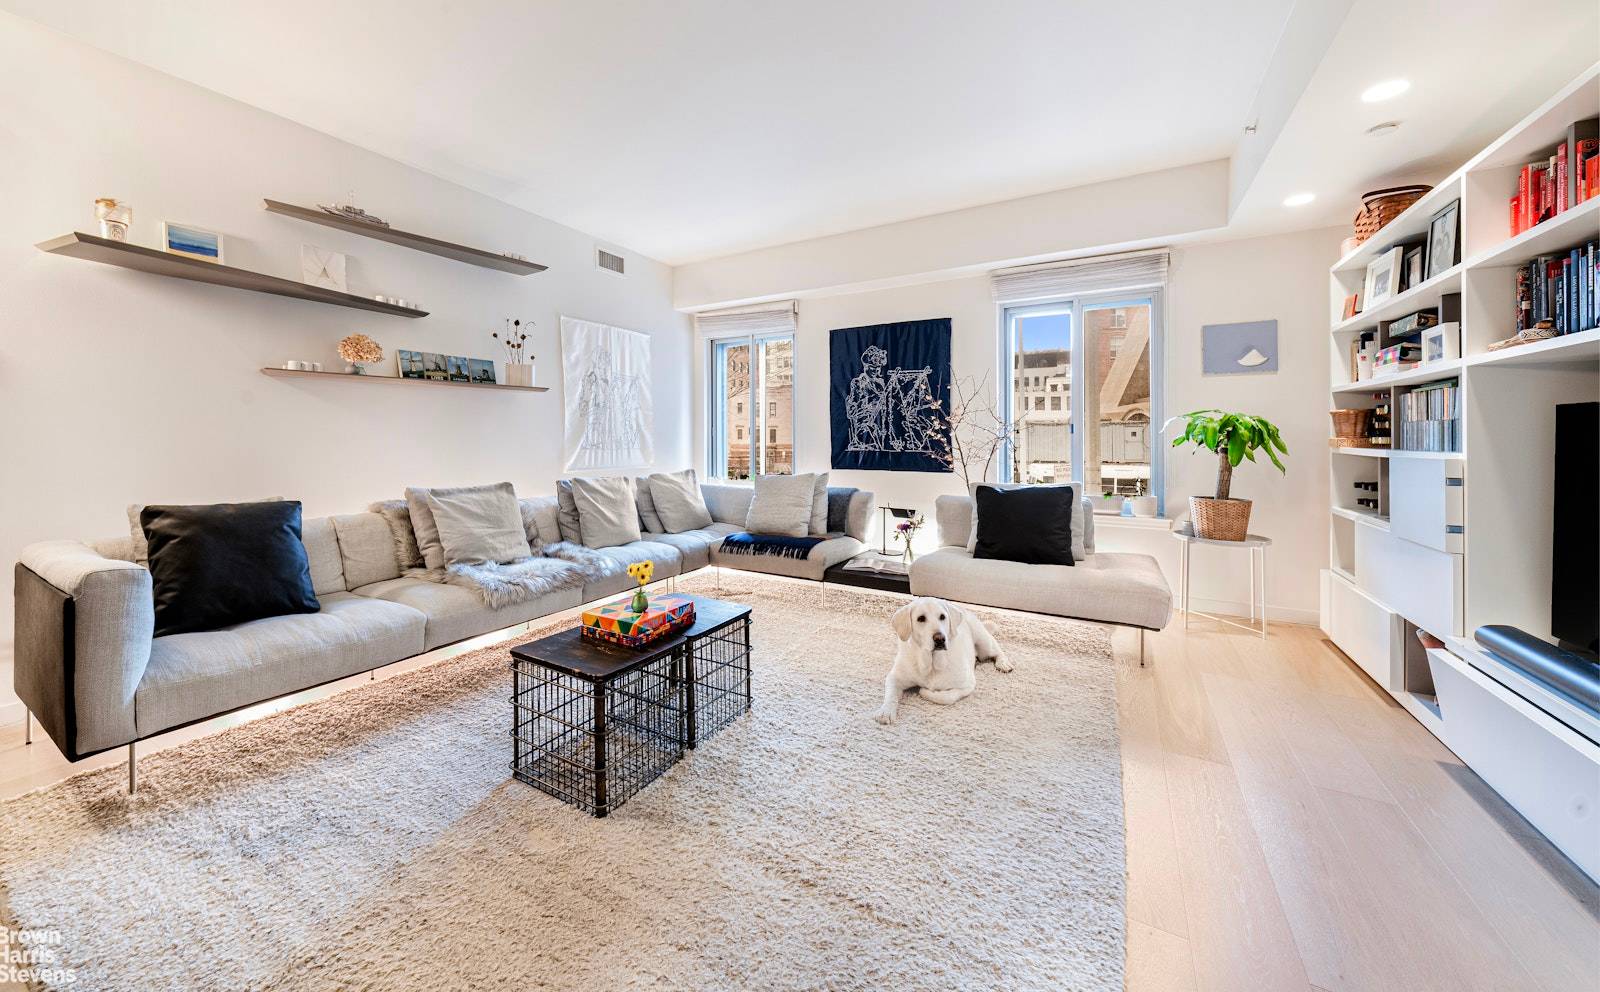 Welcome to apartment 2C at 133 Water Street in the heart of DUMBO !